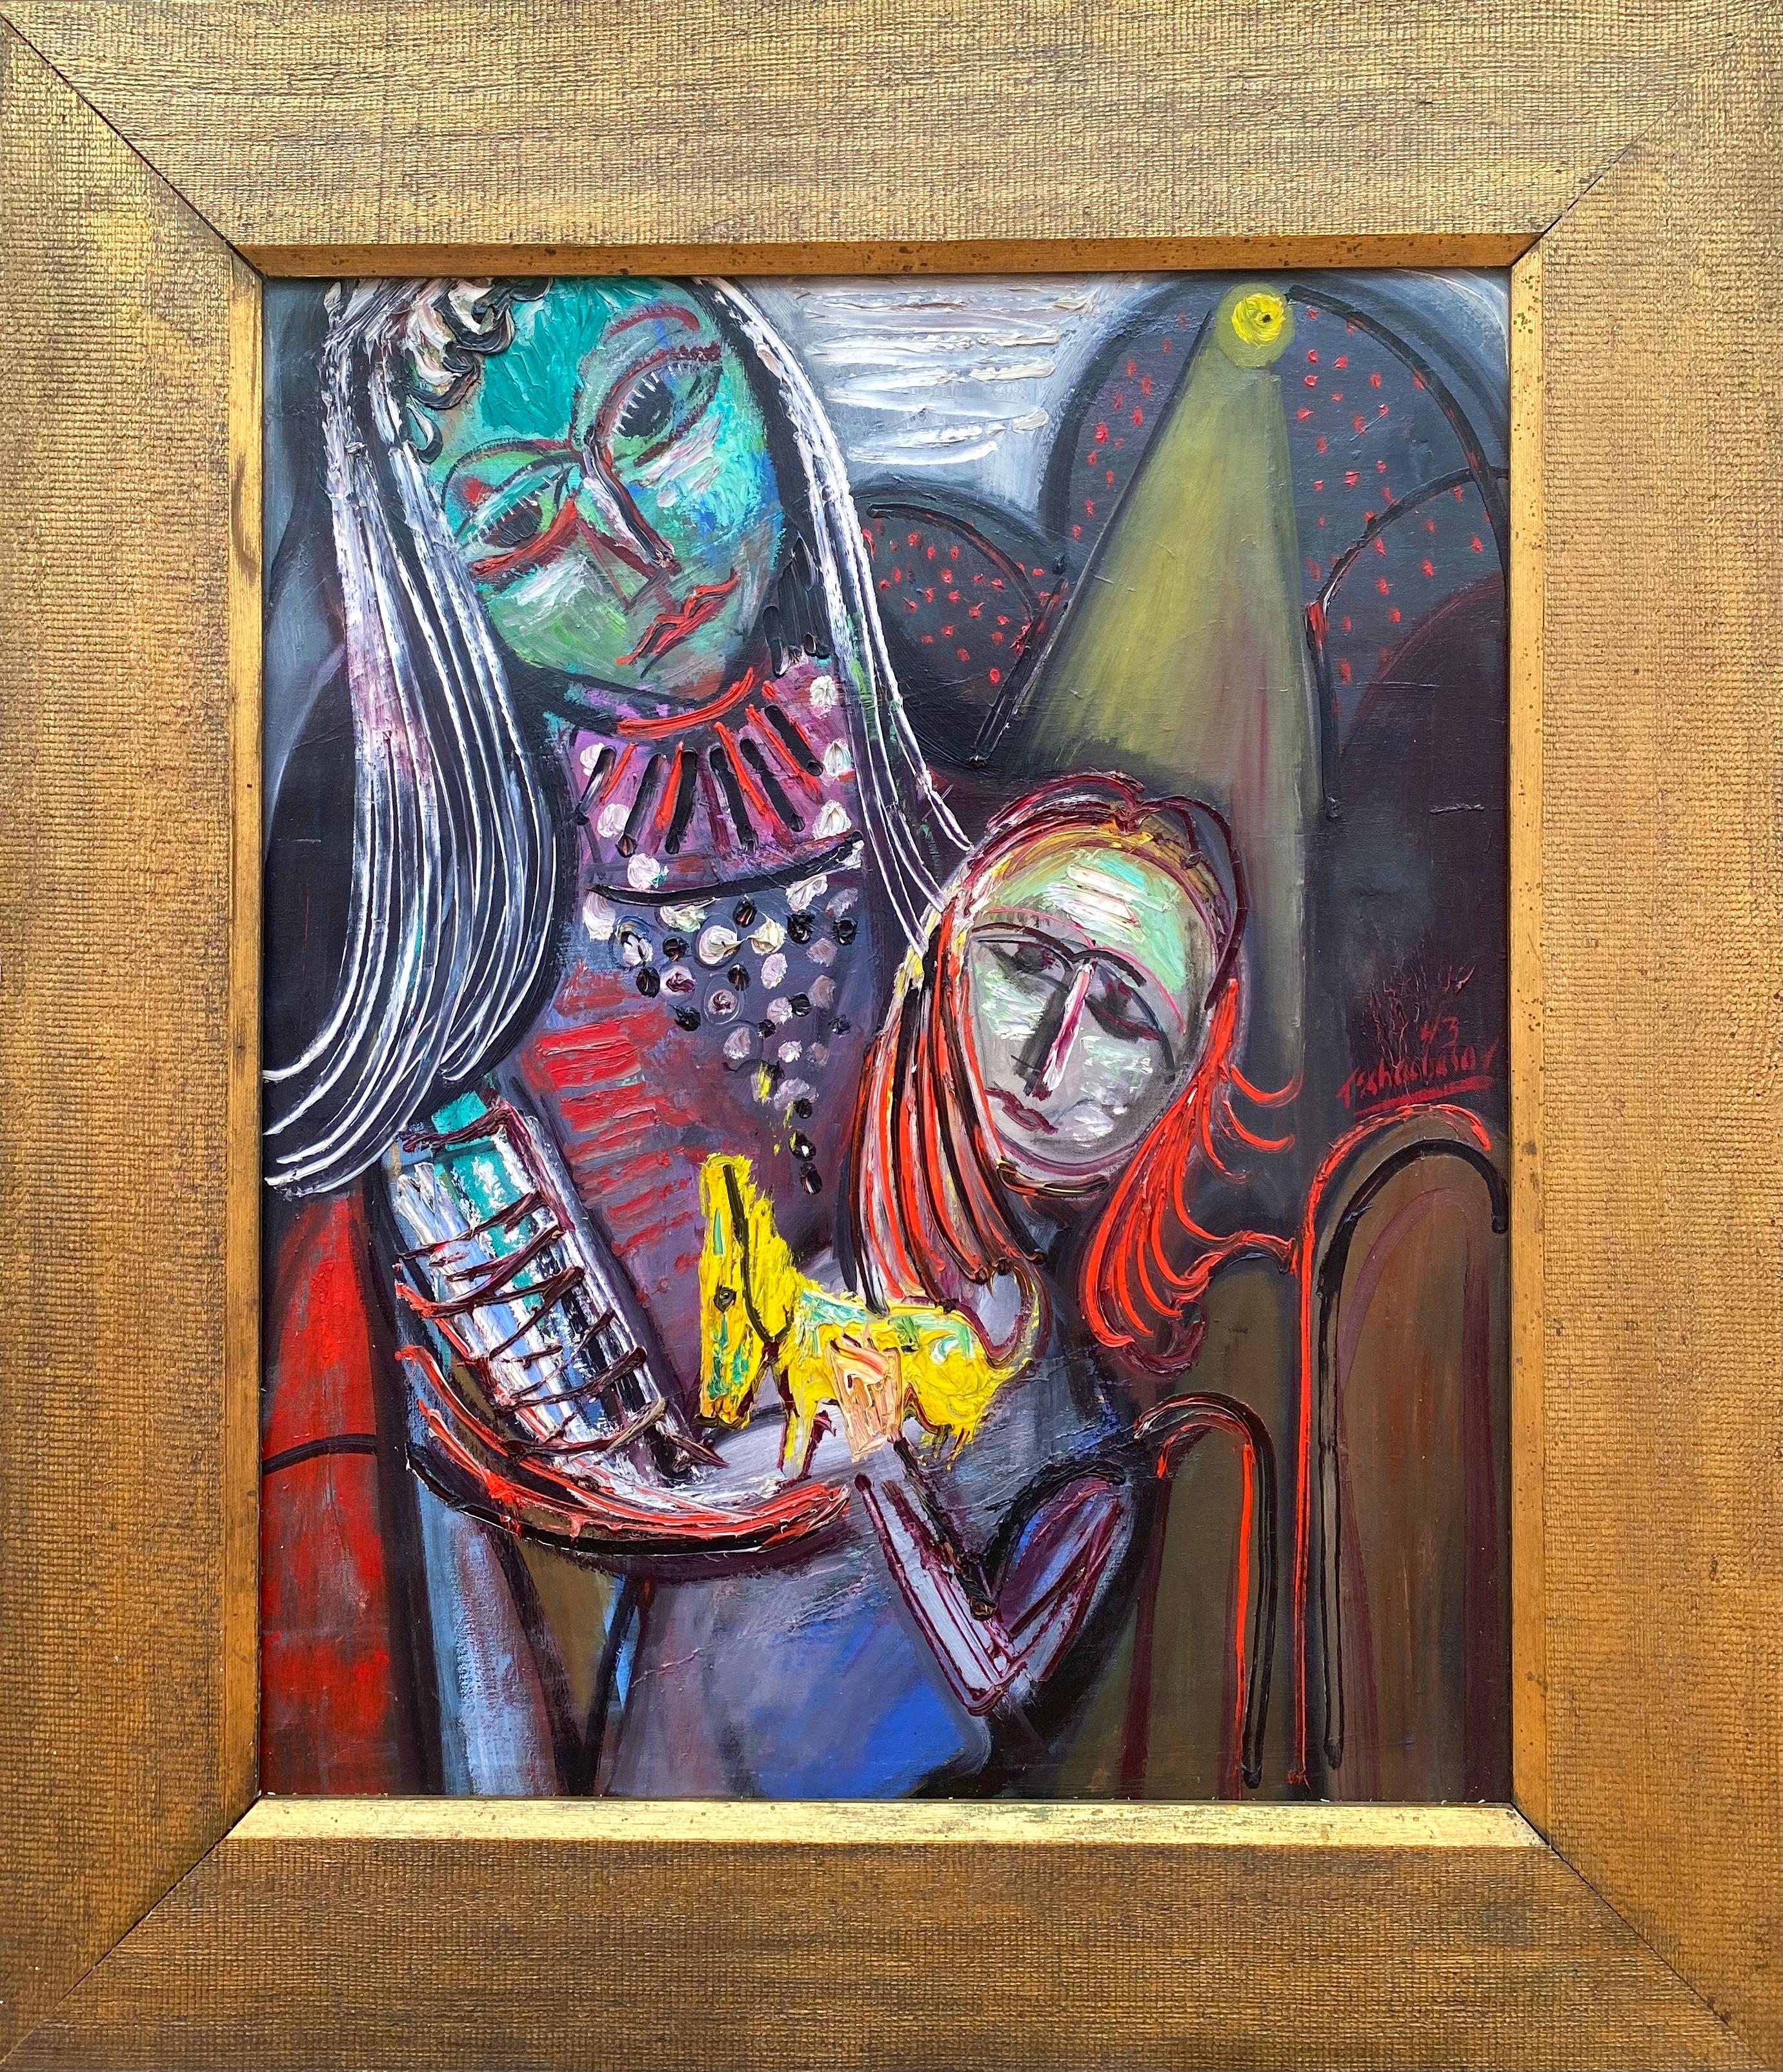 “Mother and Child” - Painting by Nahum Tschacbasov